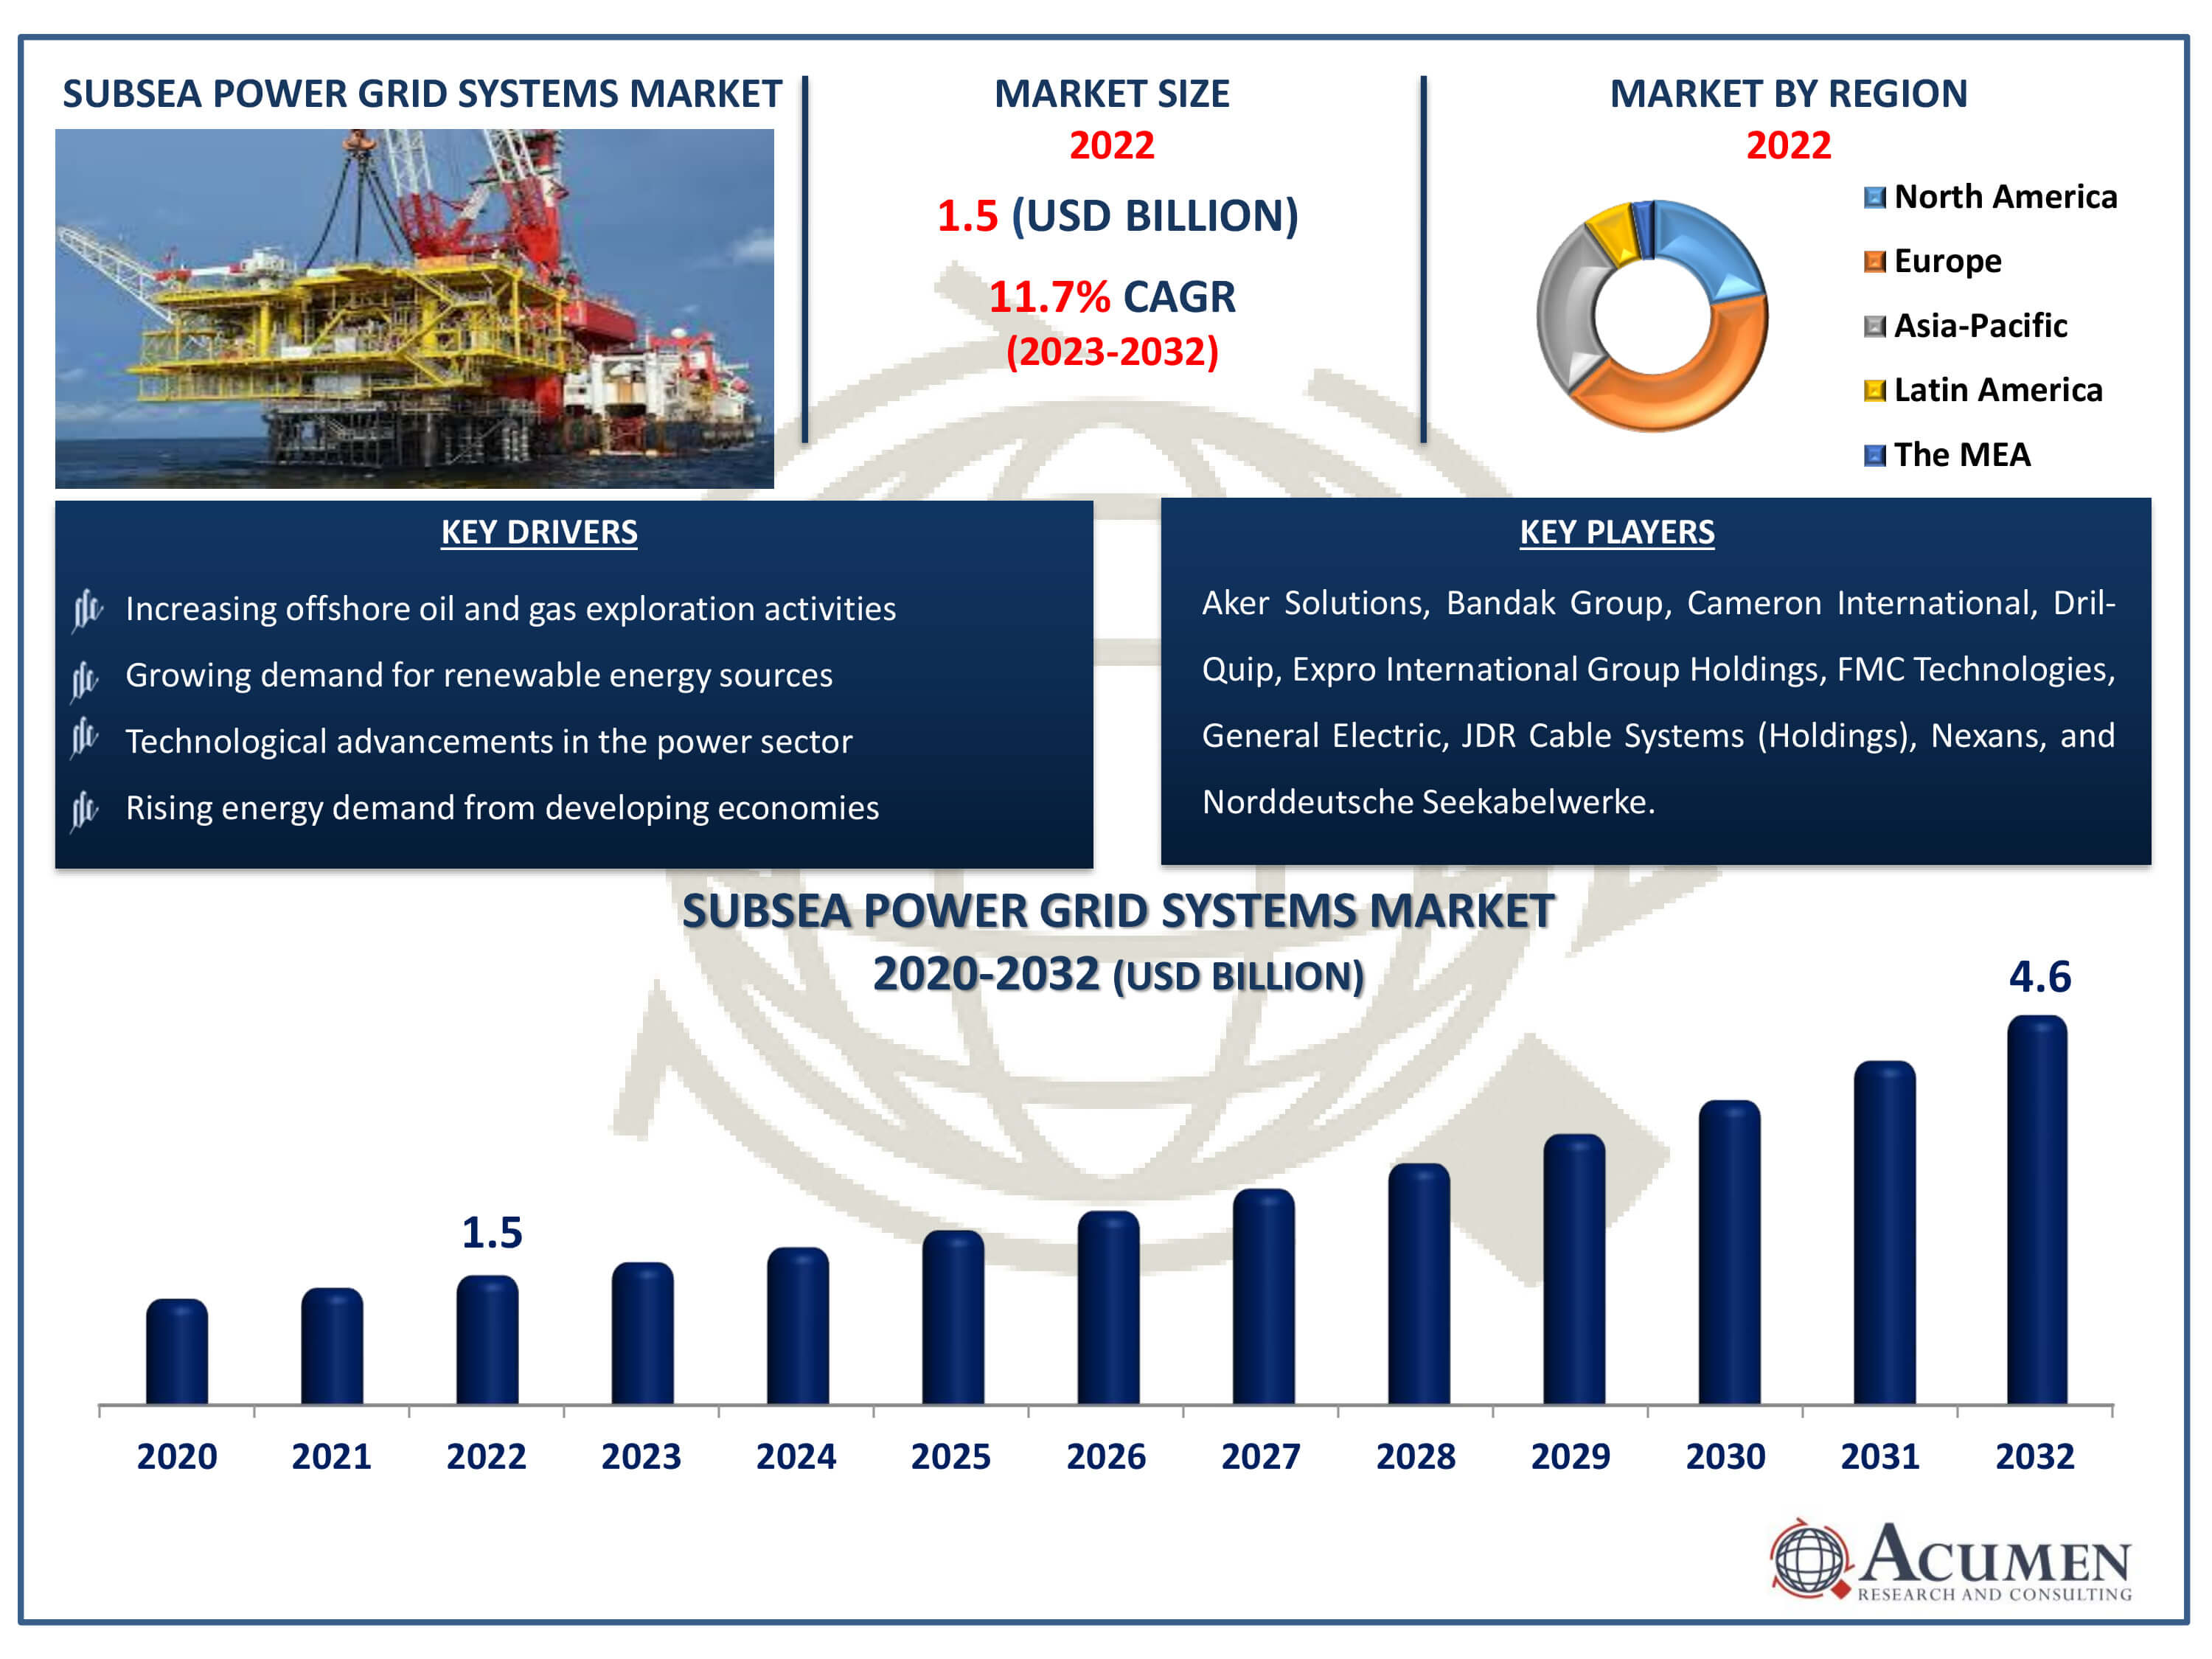 Subsea Power Grid Systems Market Dynamics